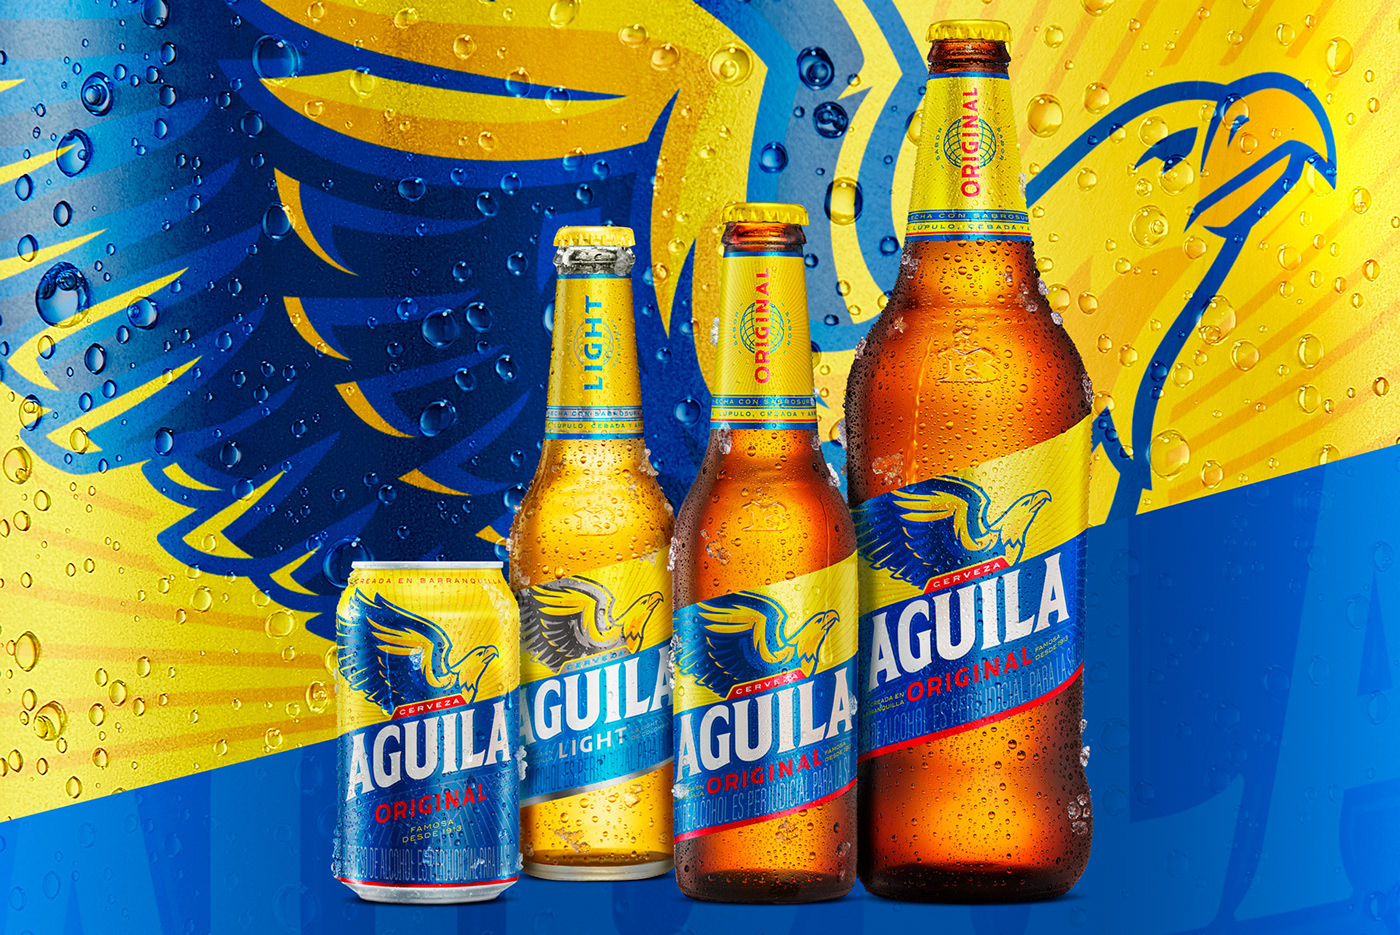 beer aguila colombia Sabrosura barranquilla Packaging bottle can yellow Rebrand